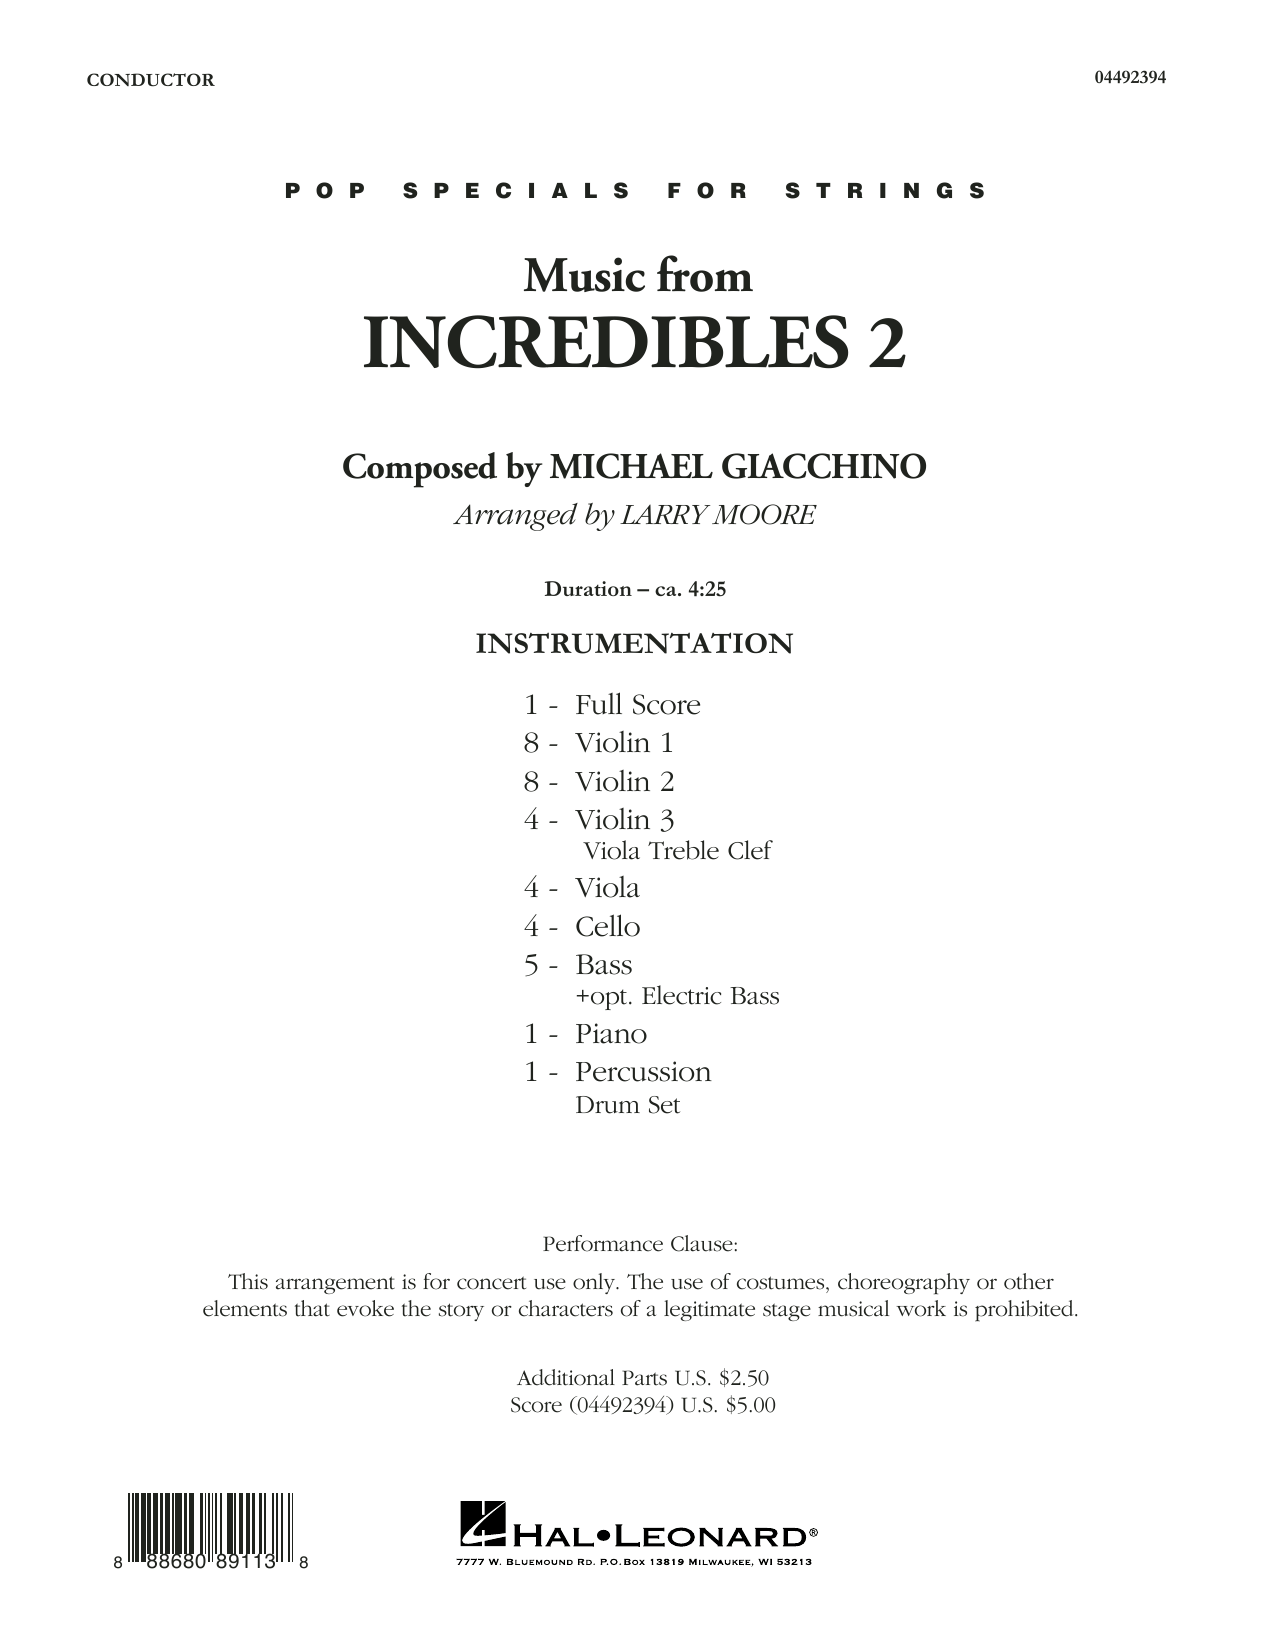 Music from Incredibles 2 (arr. Larry Moore) - Conductor Score (Full Score) (Orchestra) von Michael Giacchino